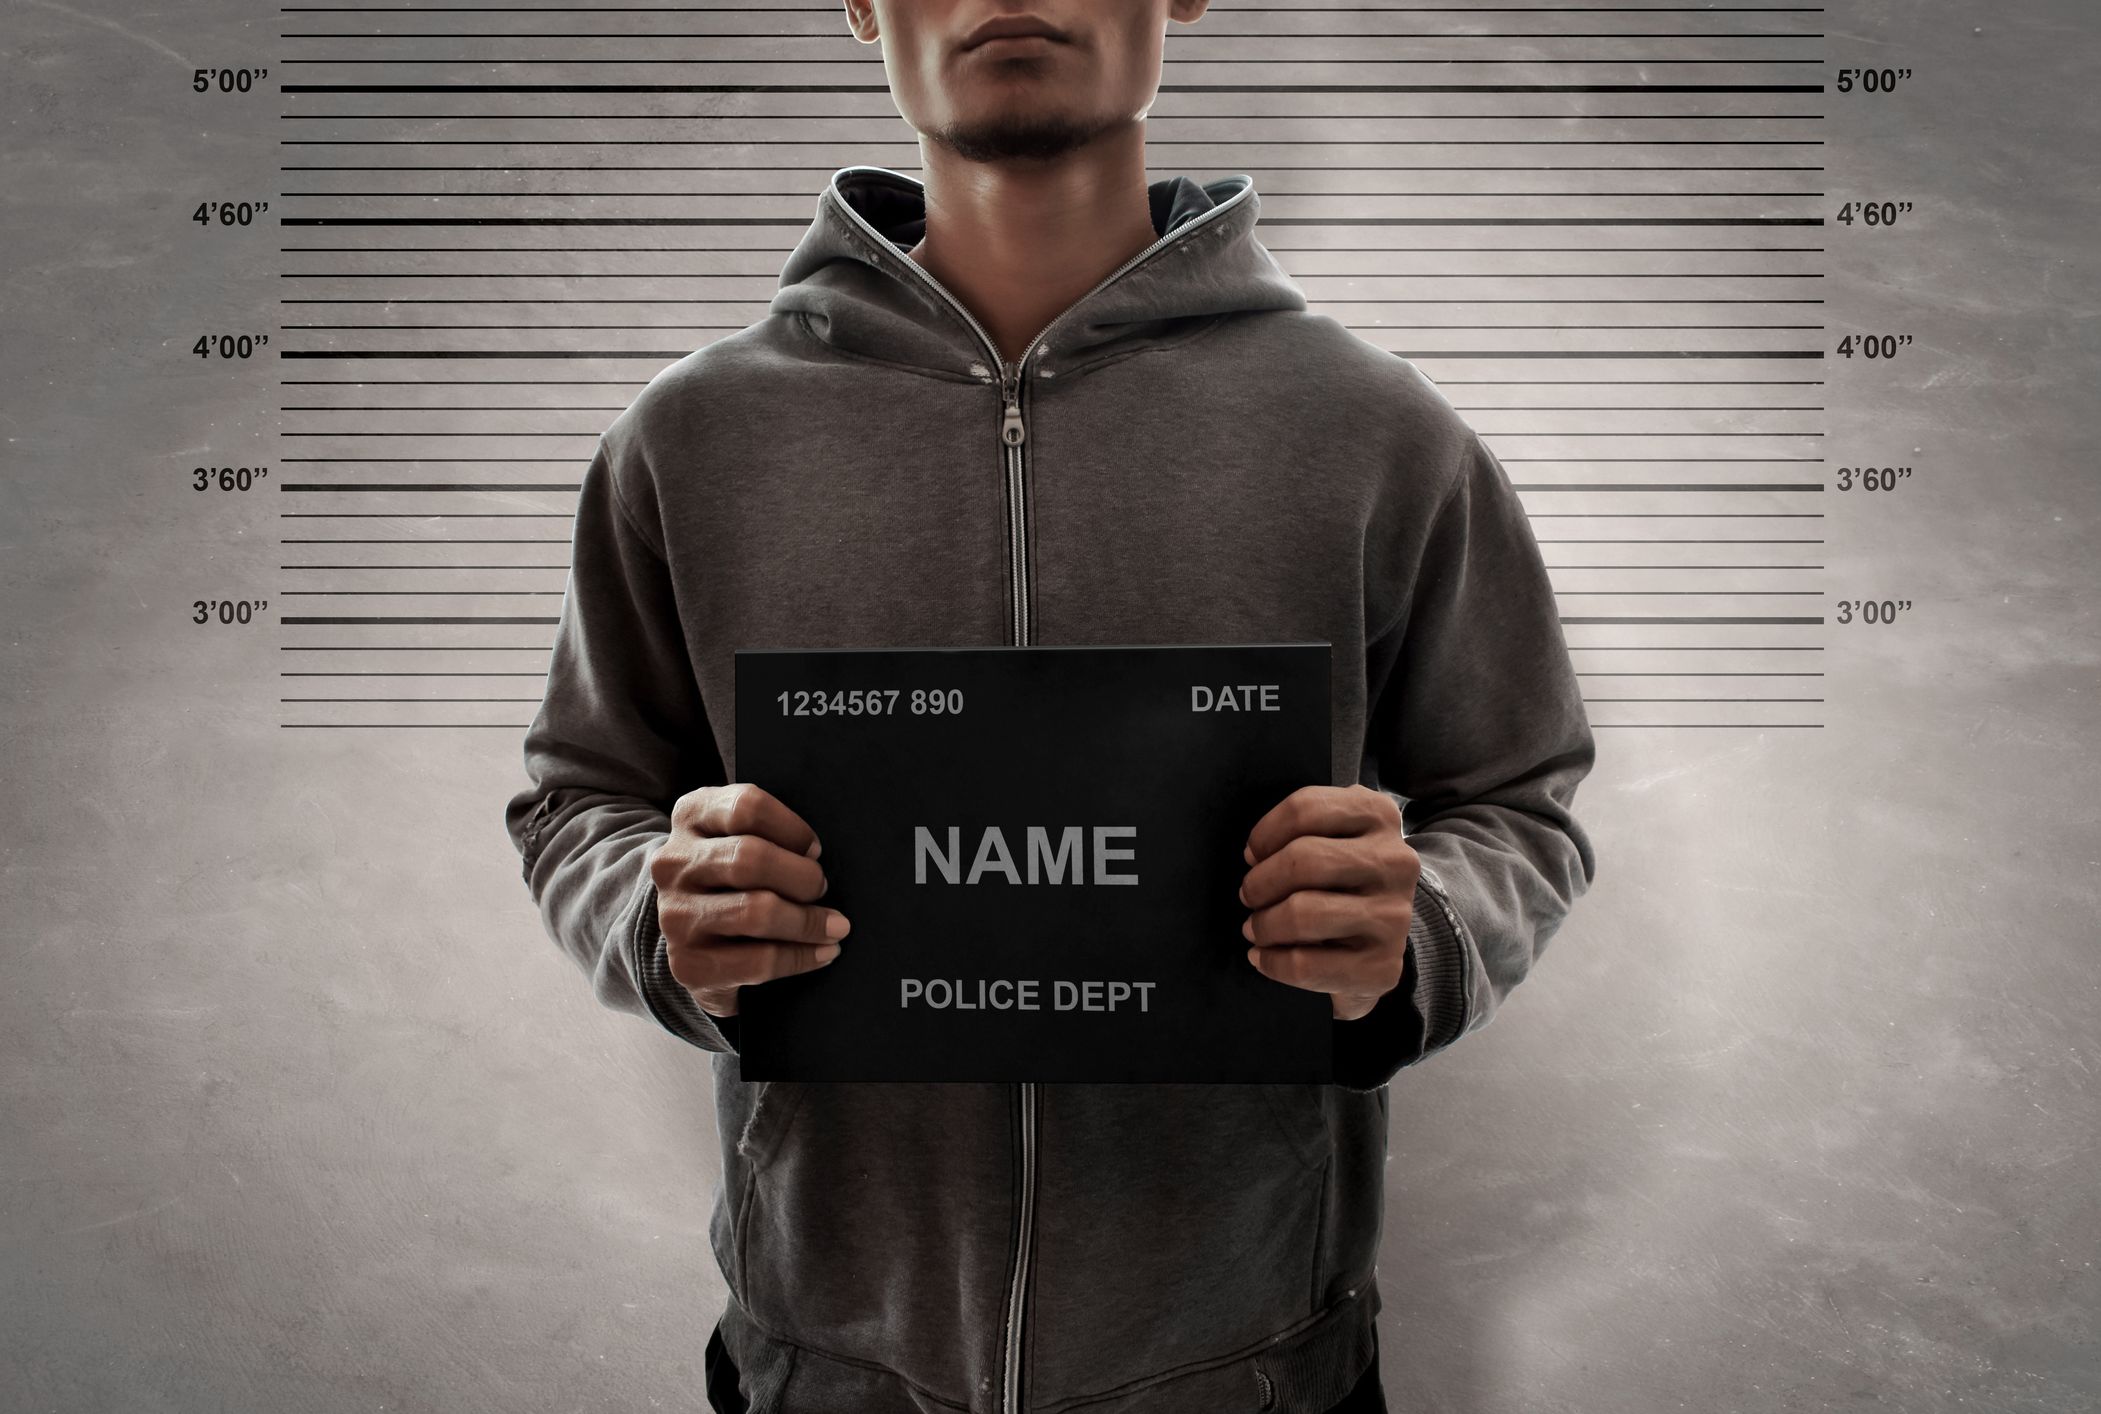 Want to Know How To Find Someone’s Mugshot? Read Here: